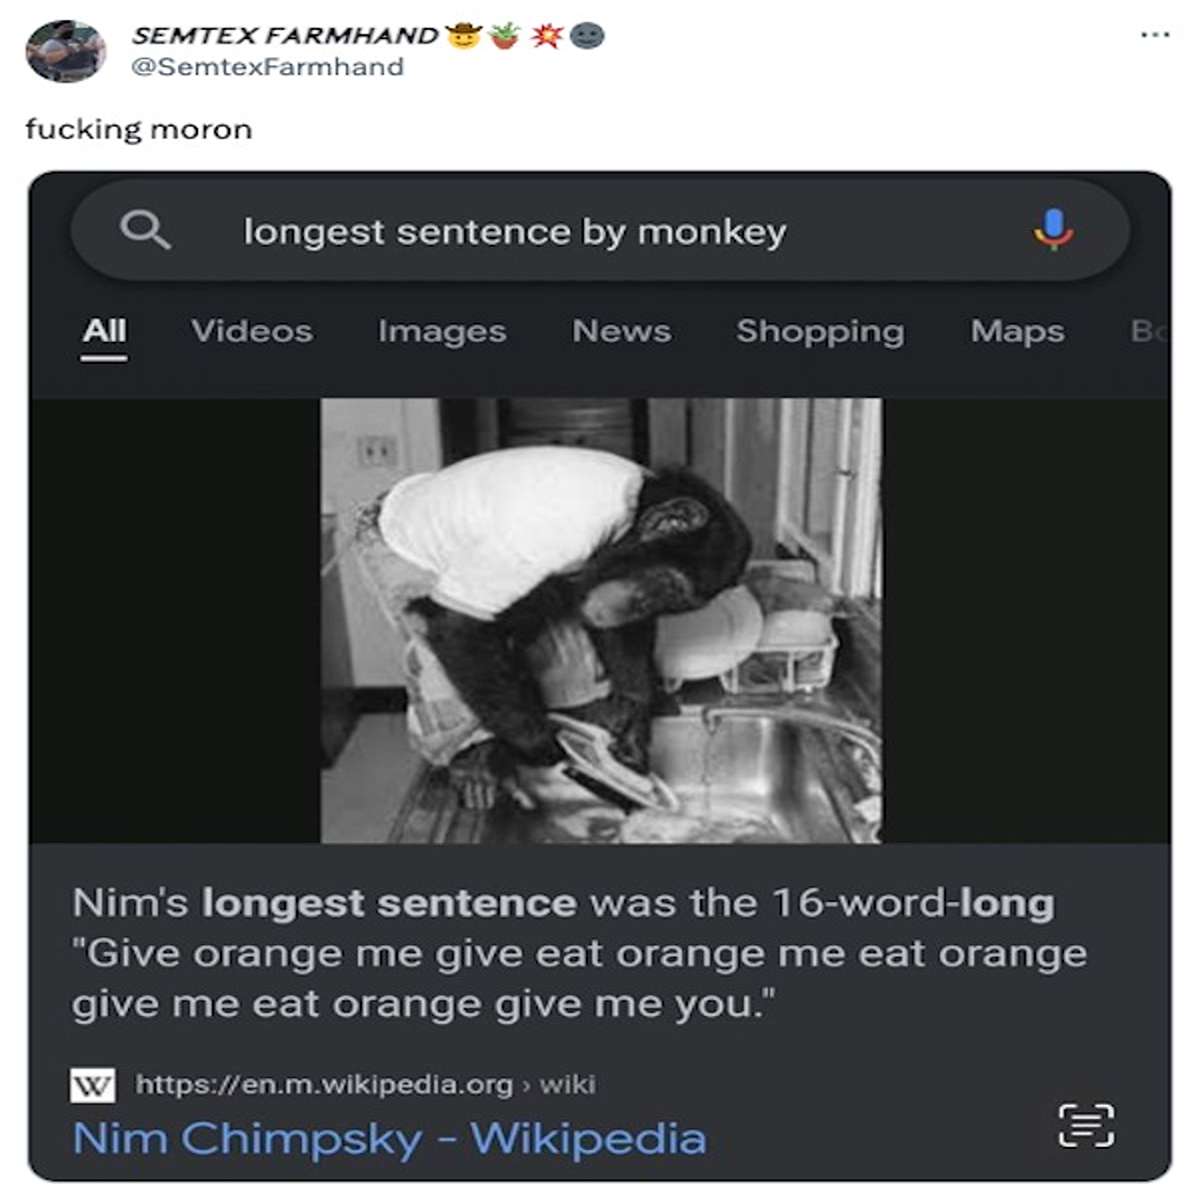 funny tweets and memes - multimedia - Semtex Farmhand fucking moron longest sentence by monkey All Videos Images News Shopping Maps Nim's longest sentence was the 16wordlong "Give orange me give eat orange me eat orange give me eat orange give me you." W 